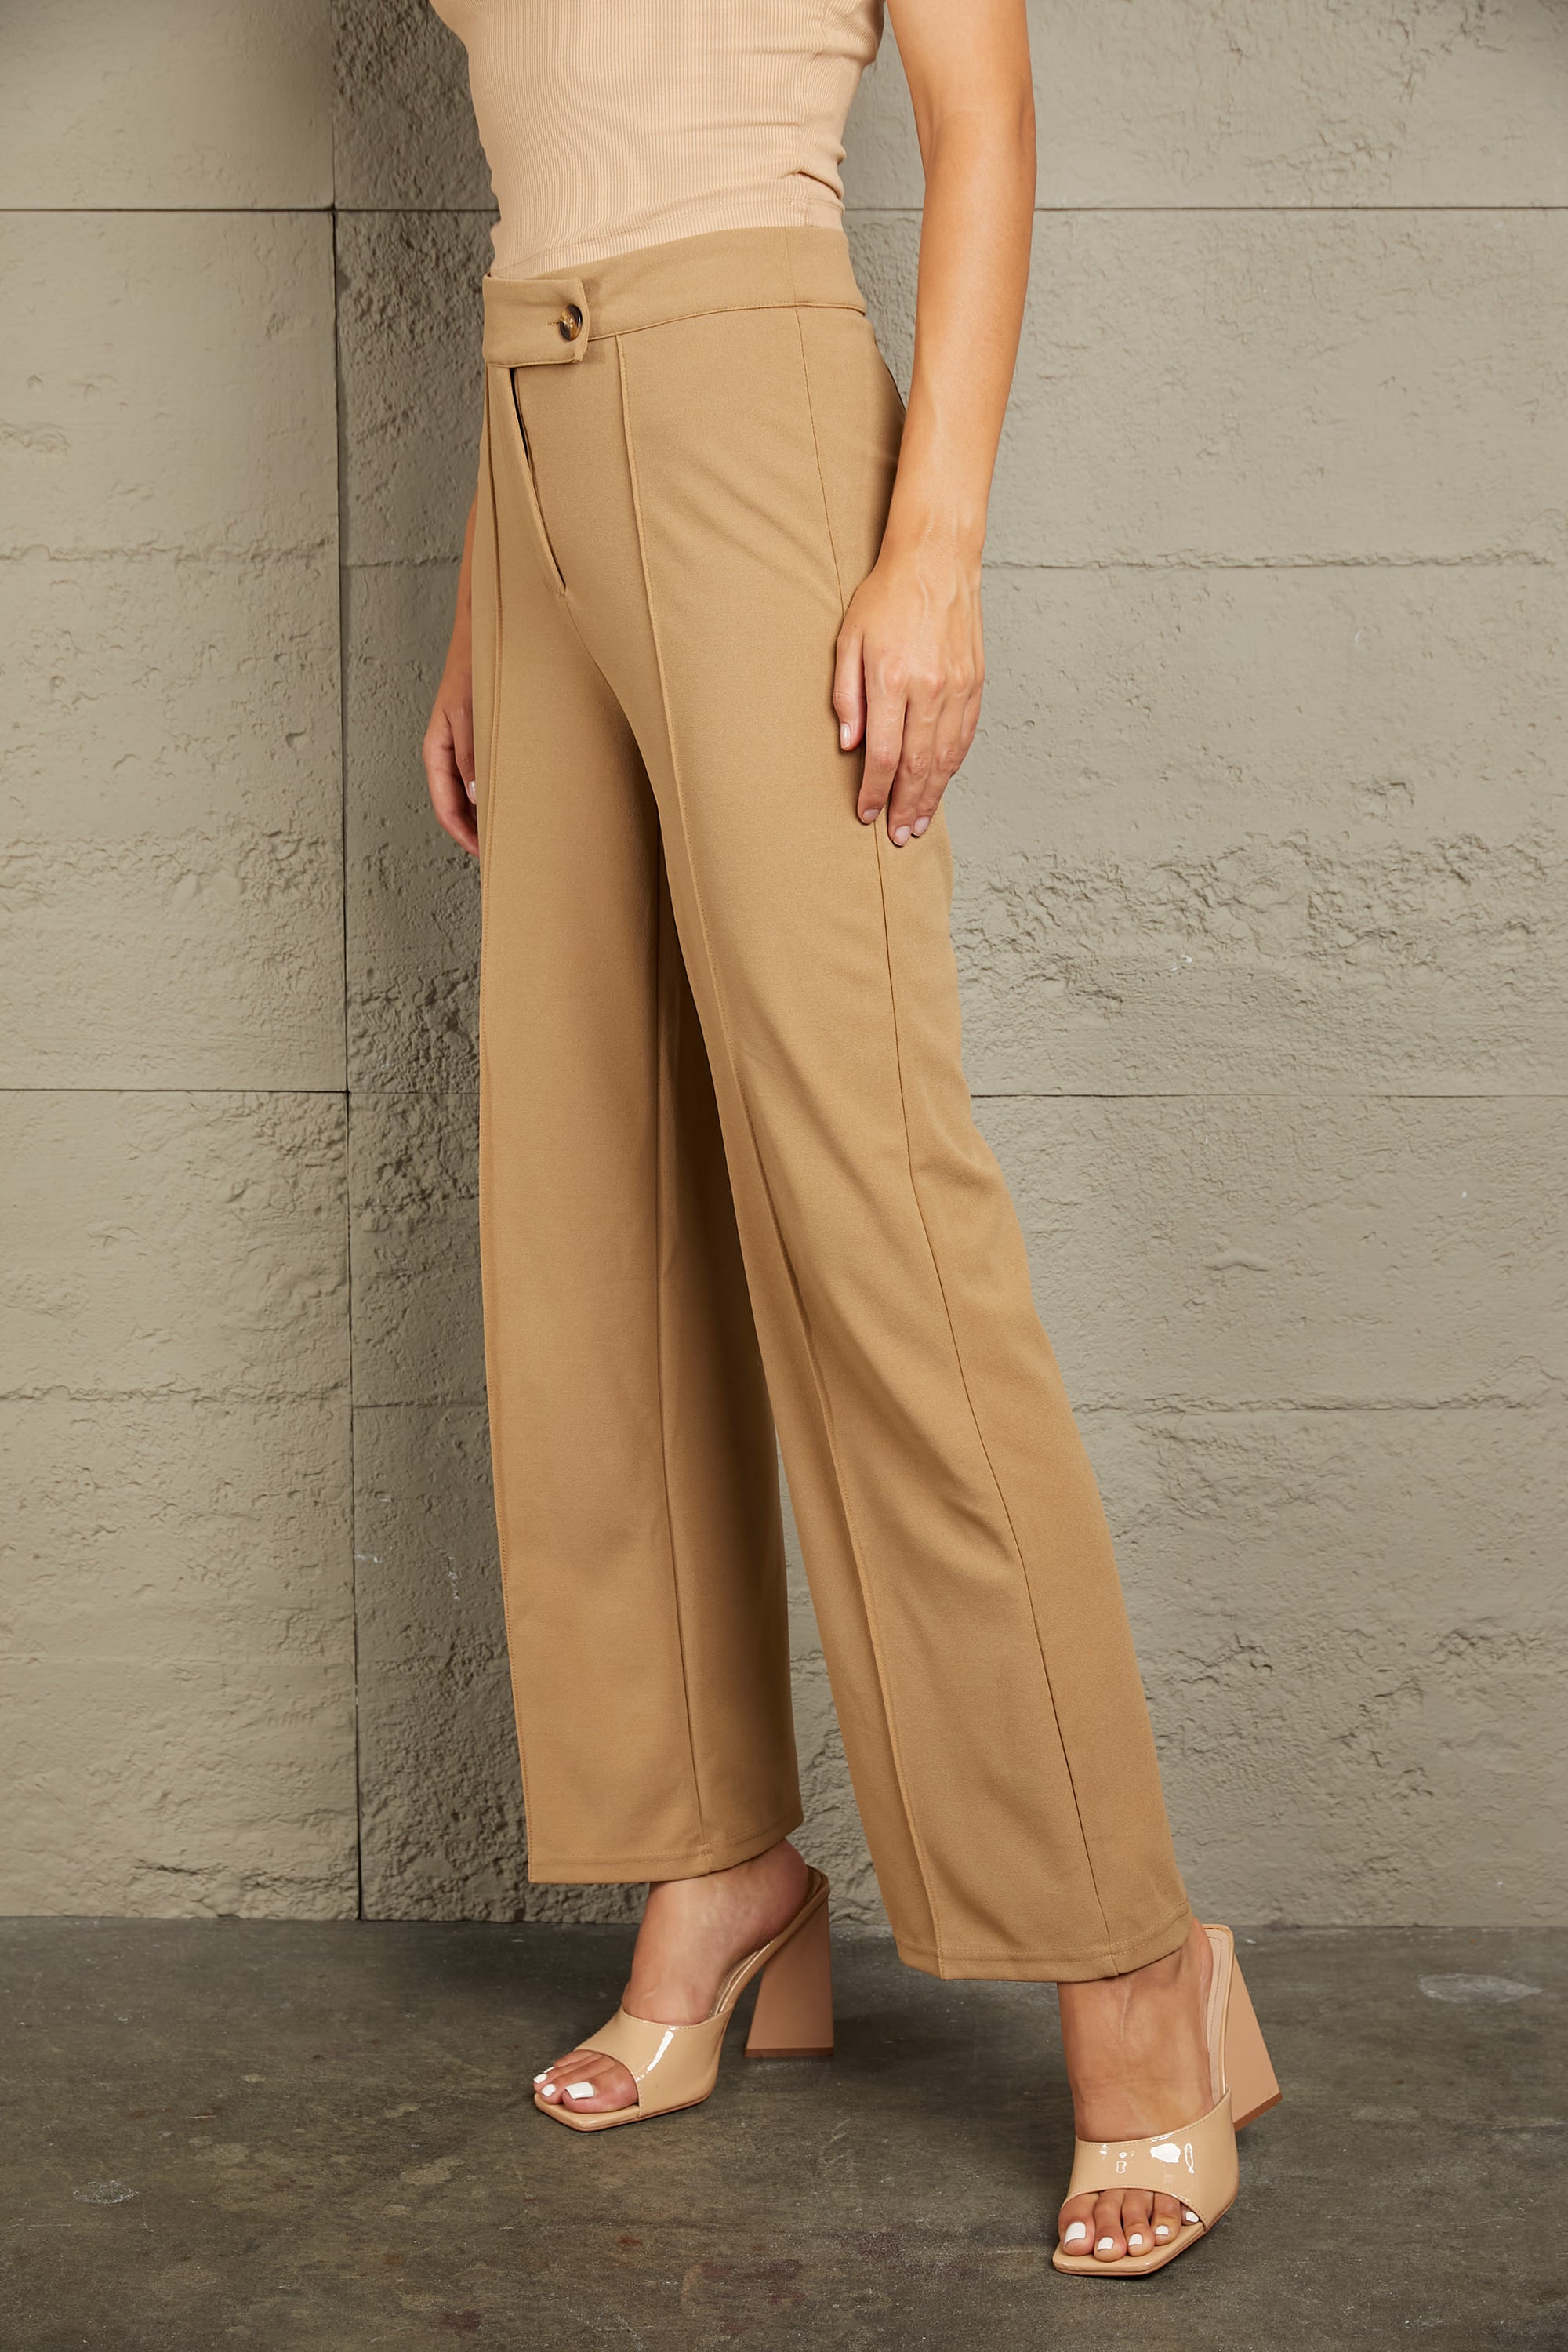 Rosy Brown Double Take Center Seam Straight Leg Pants Sentient Beauty Fashions Apparel & Accessories